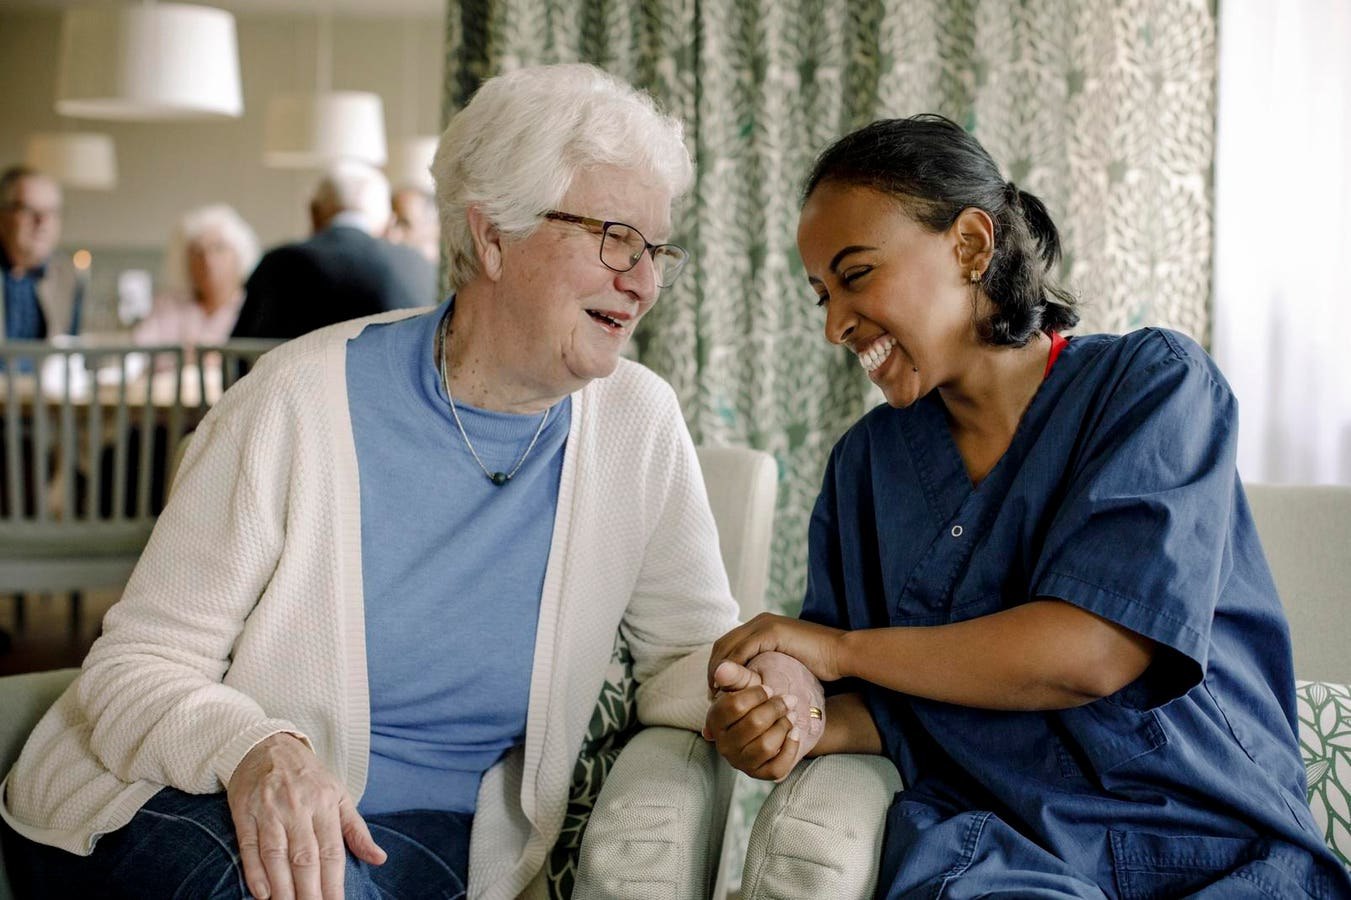 Caring For The Elderly: A Look At The Landscape And Business Opportunities